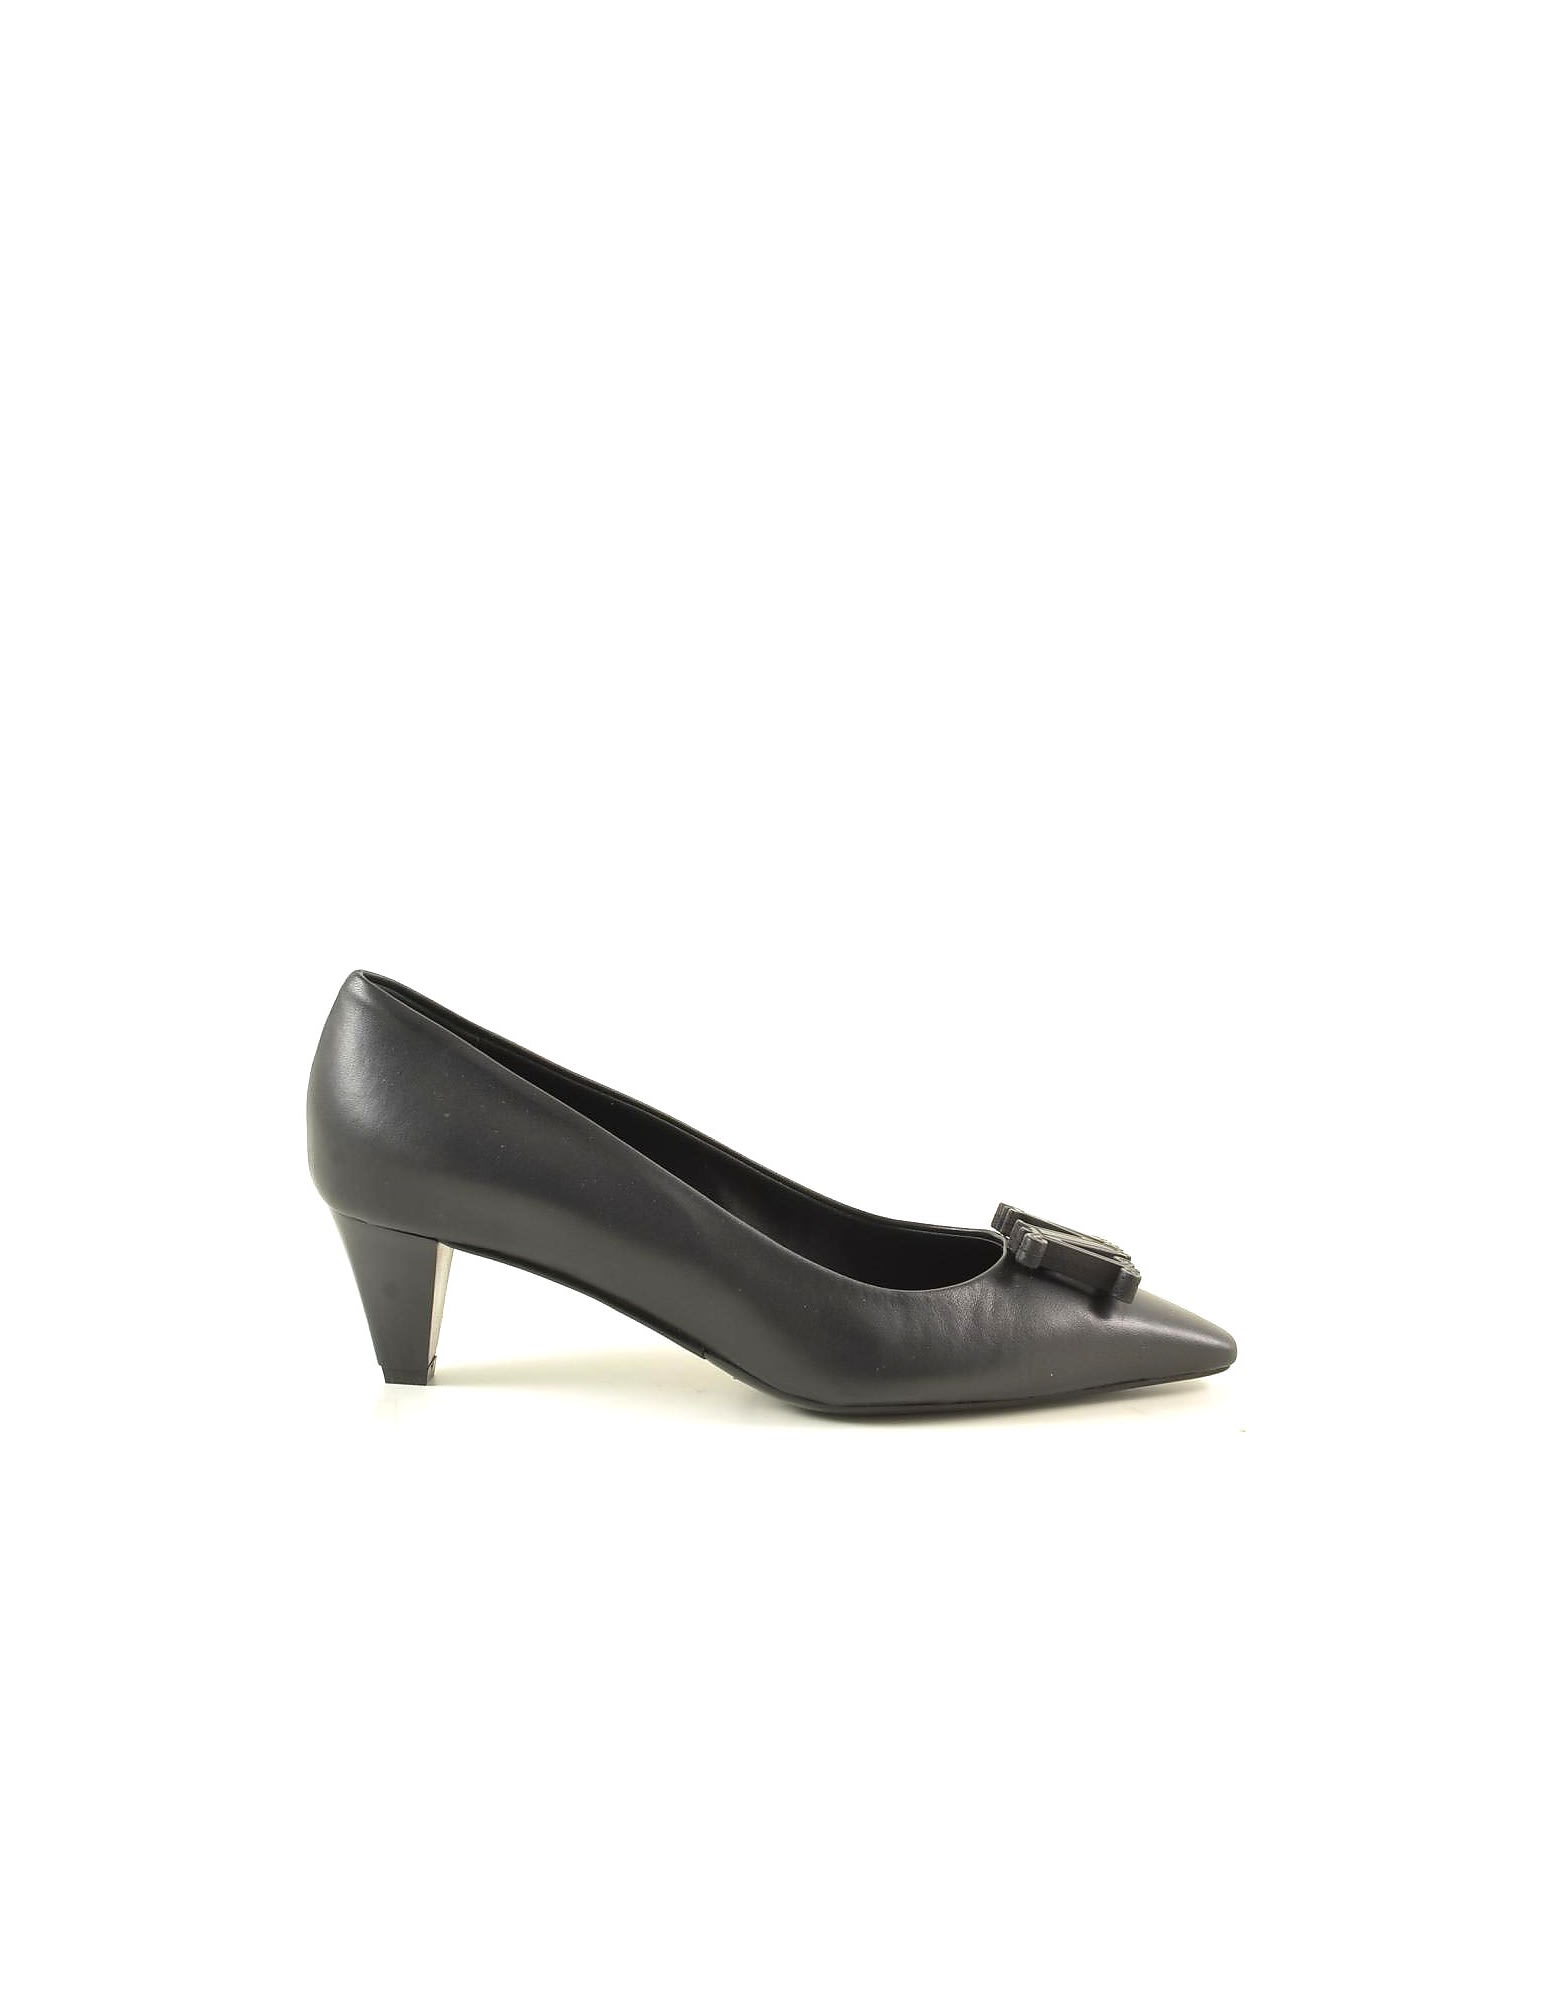 Buy Max Mara Black Leather M Mid-heel Pumps online, shop Max Mara shoes with free shipping